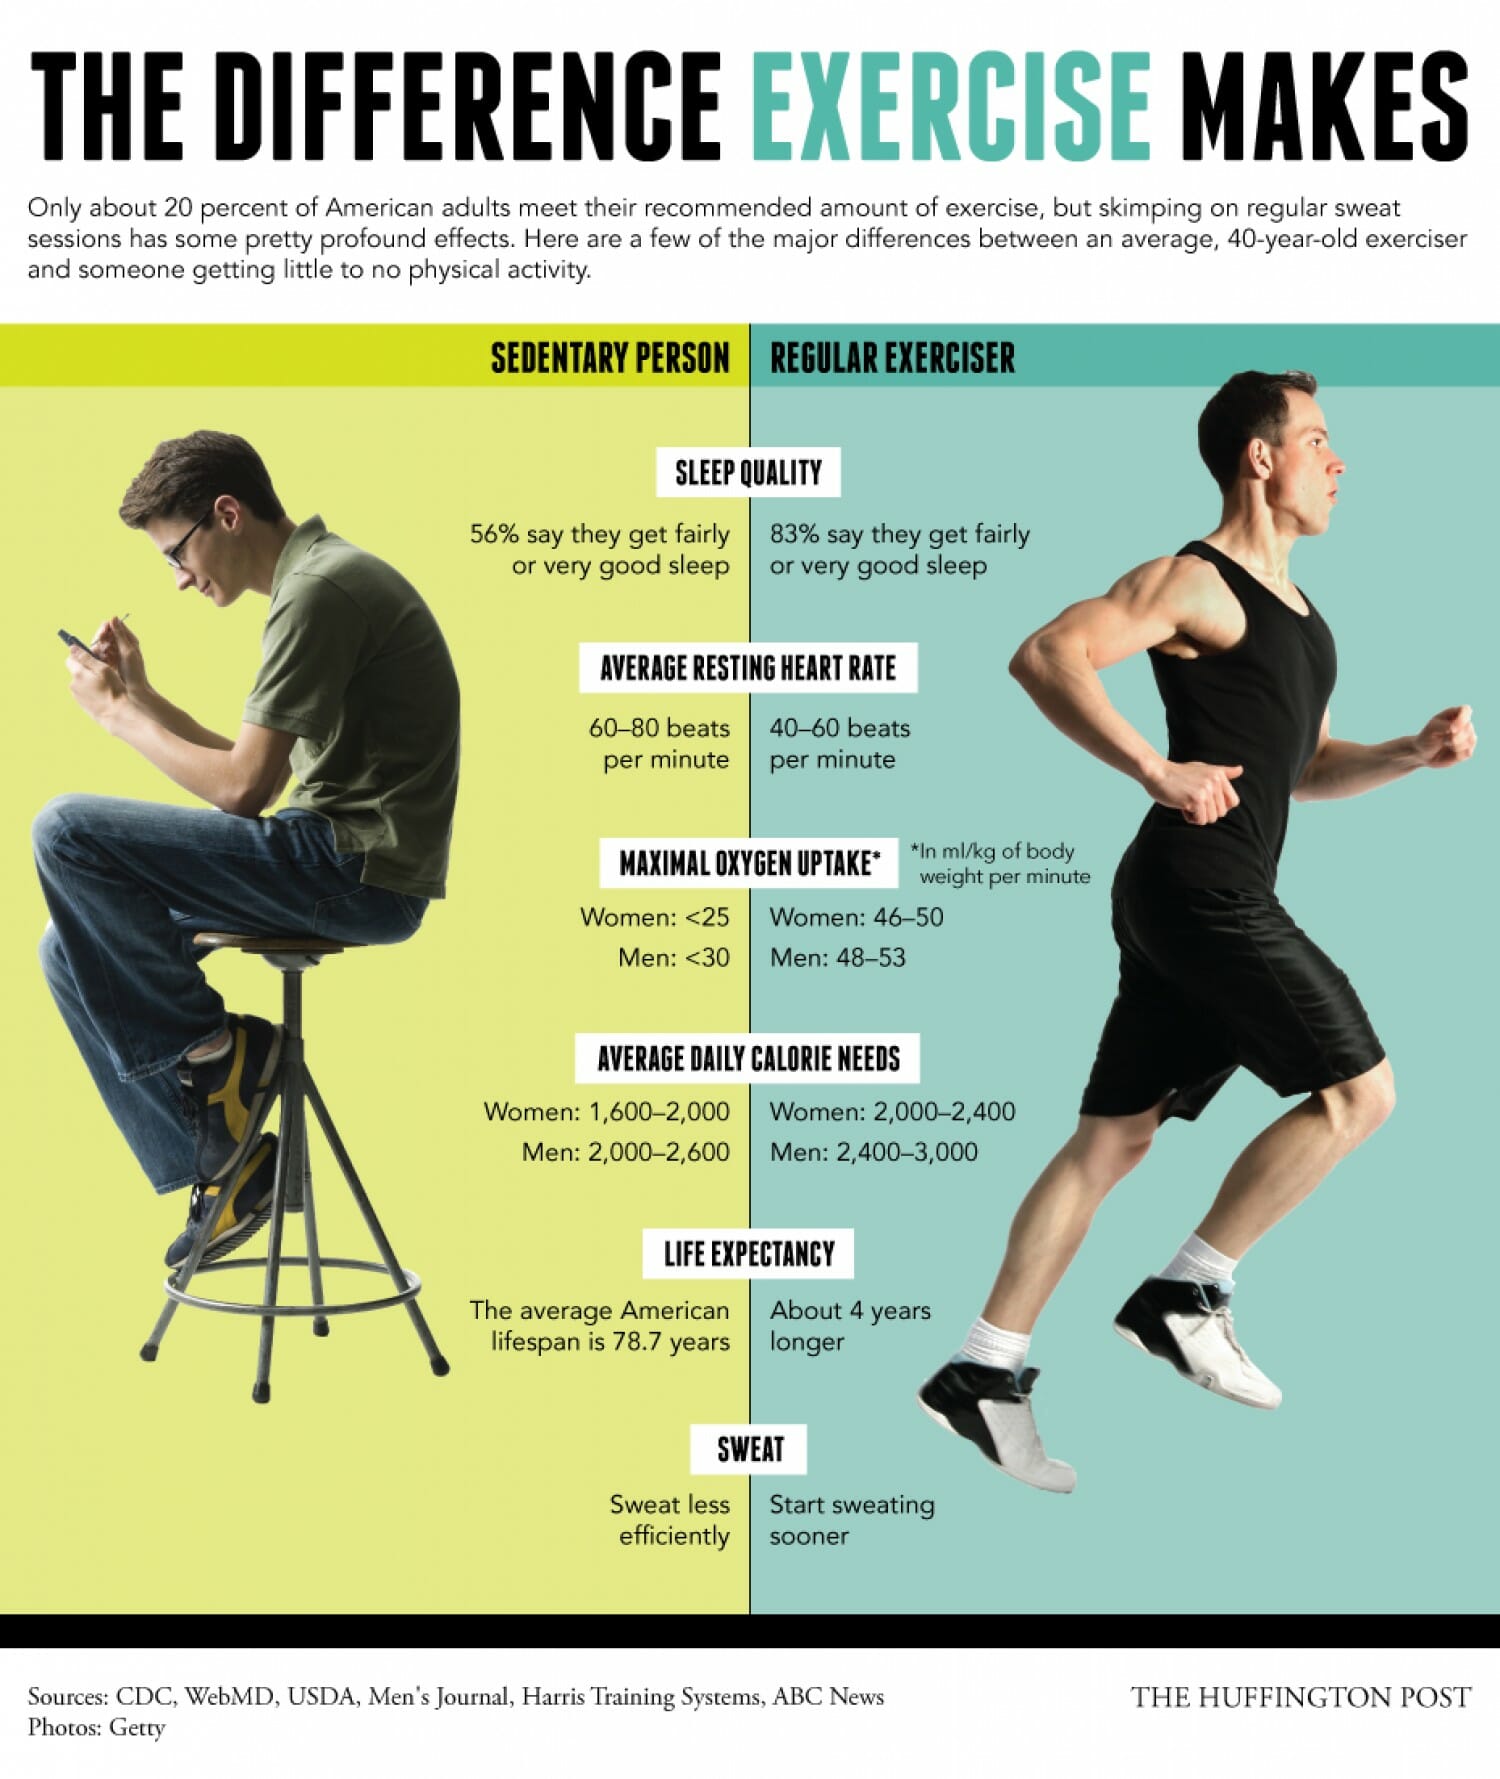 Does Exercise Make a Difference HealthStatus